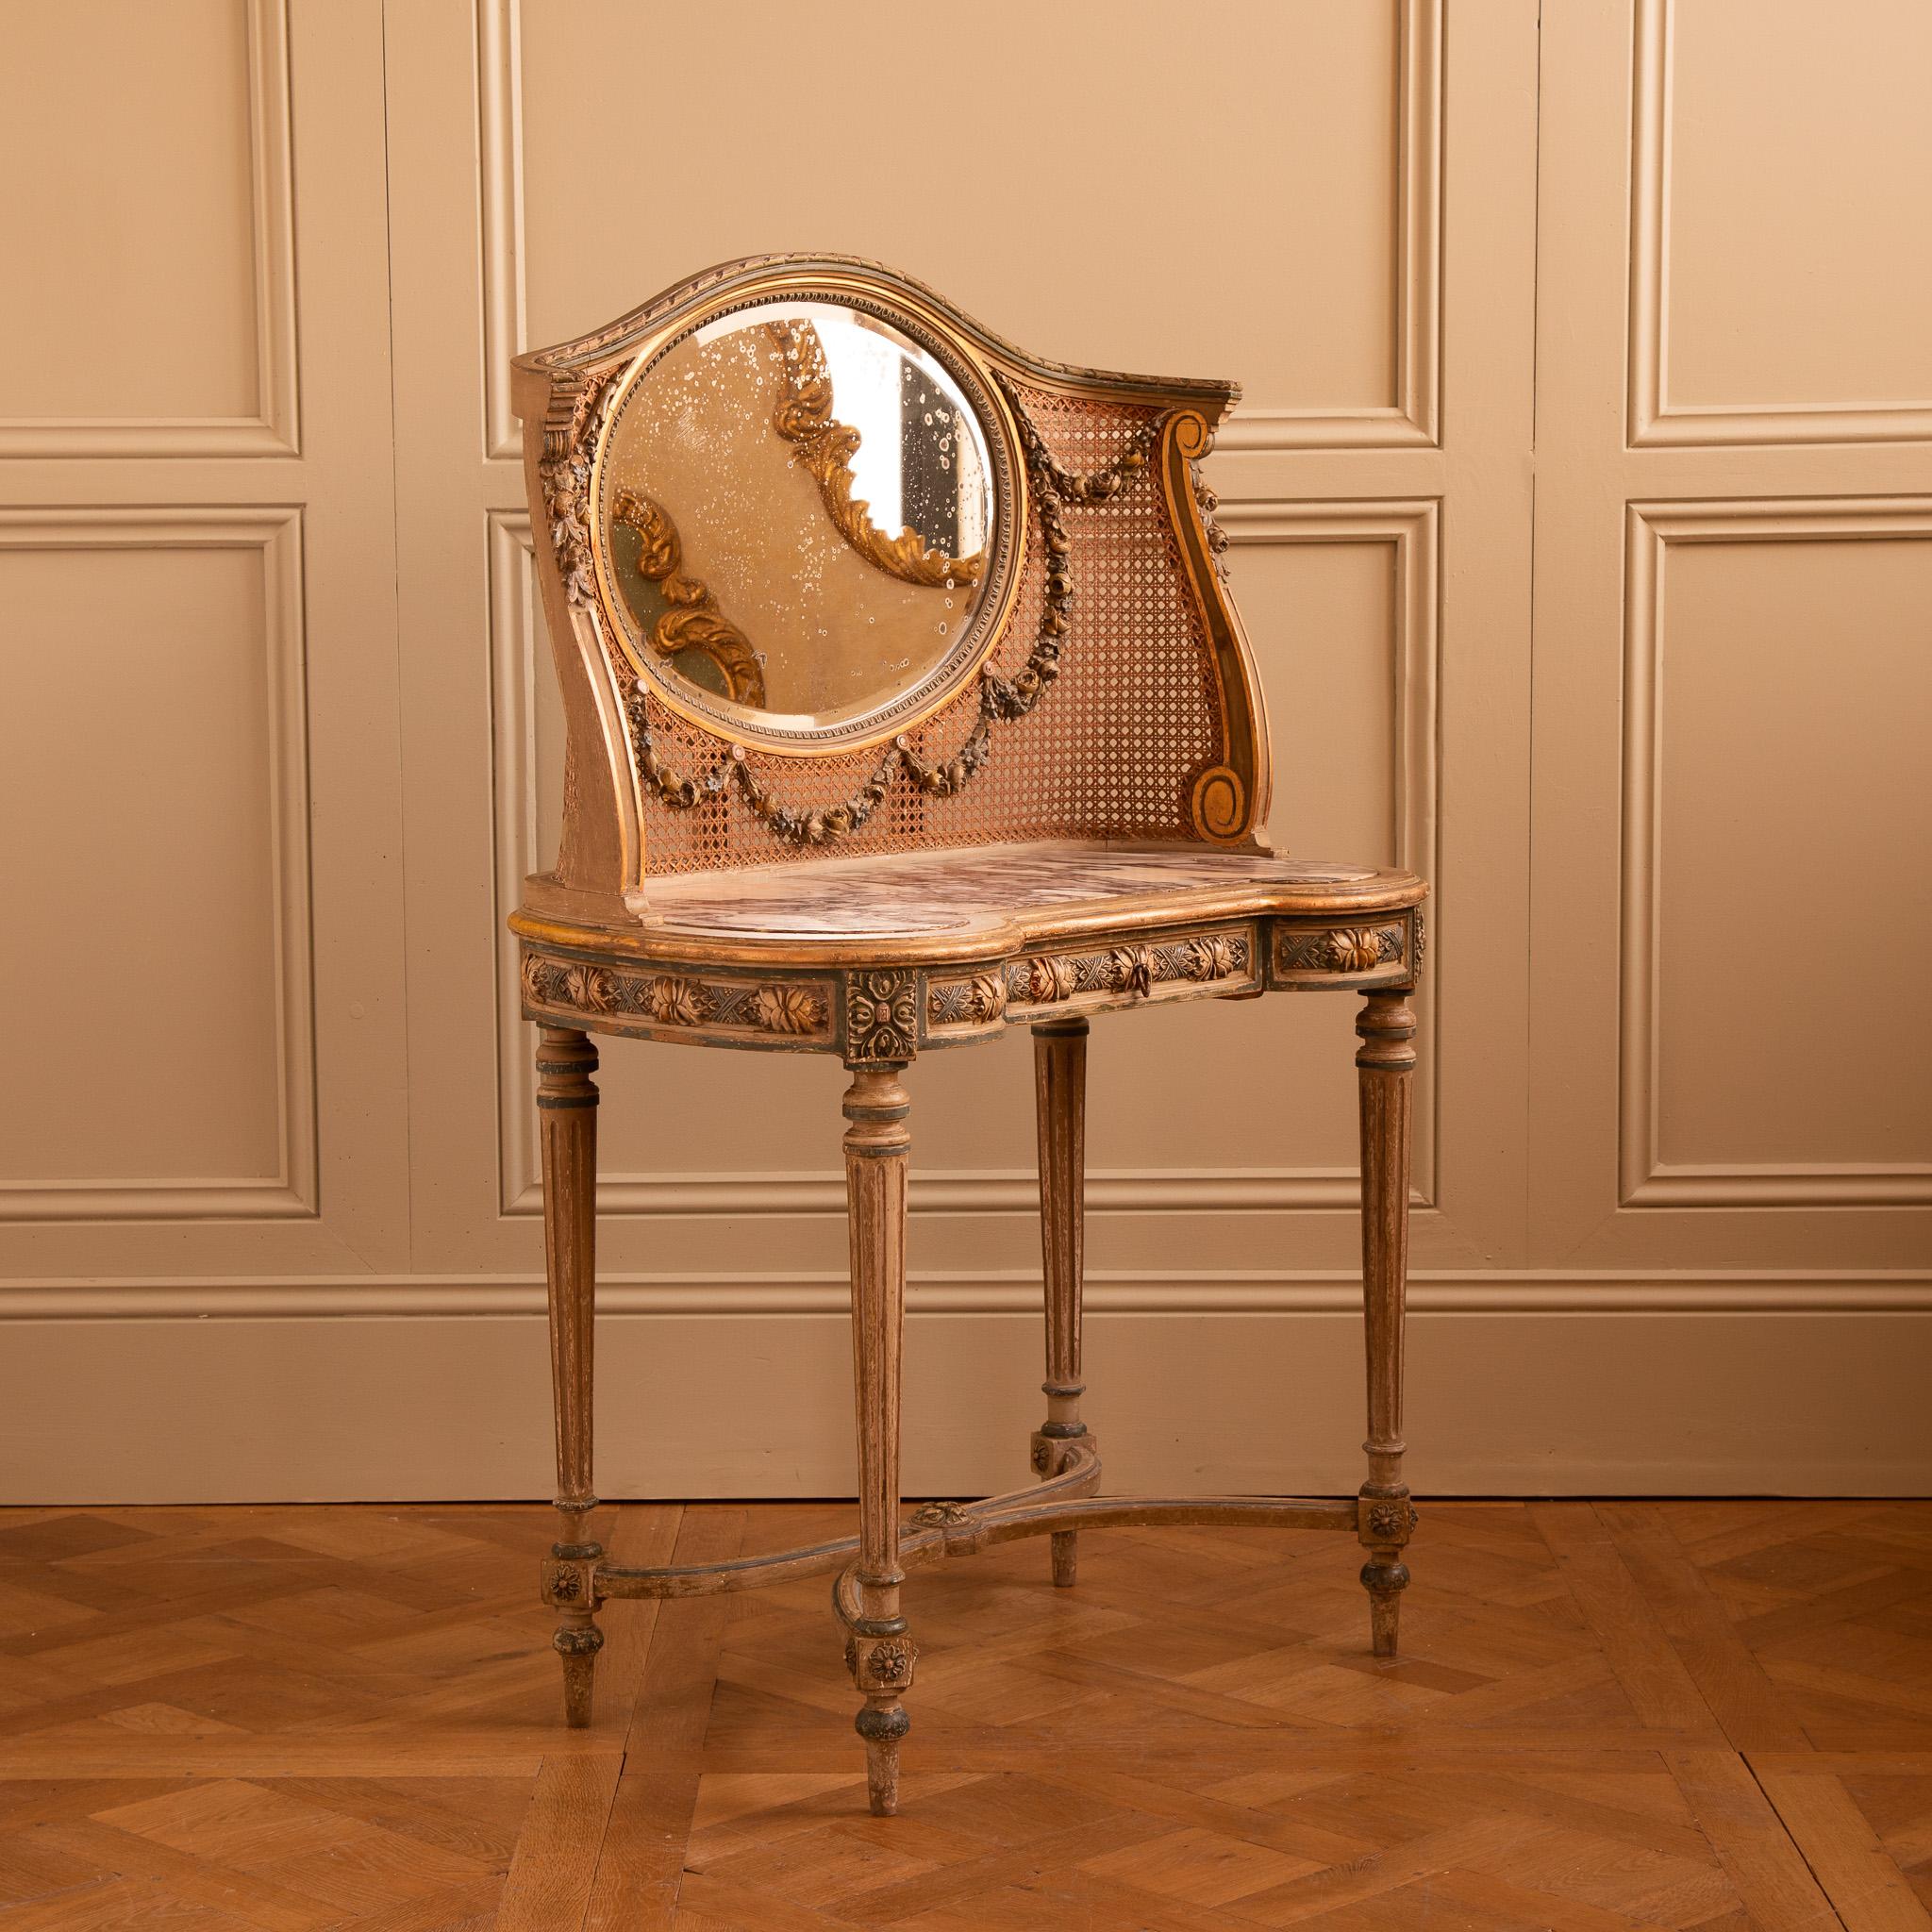 A French, Louis XVI style dressing table/Vanity Unit from the early 1900's with fine carving and a beautiful hand painted finish which accentuates it's detailing. The kidney shape table has a striking Breche Violette marble and a slim line drawer